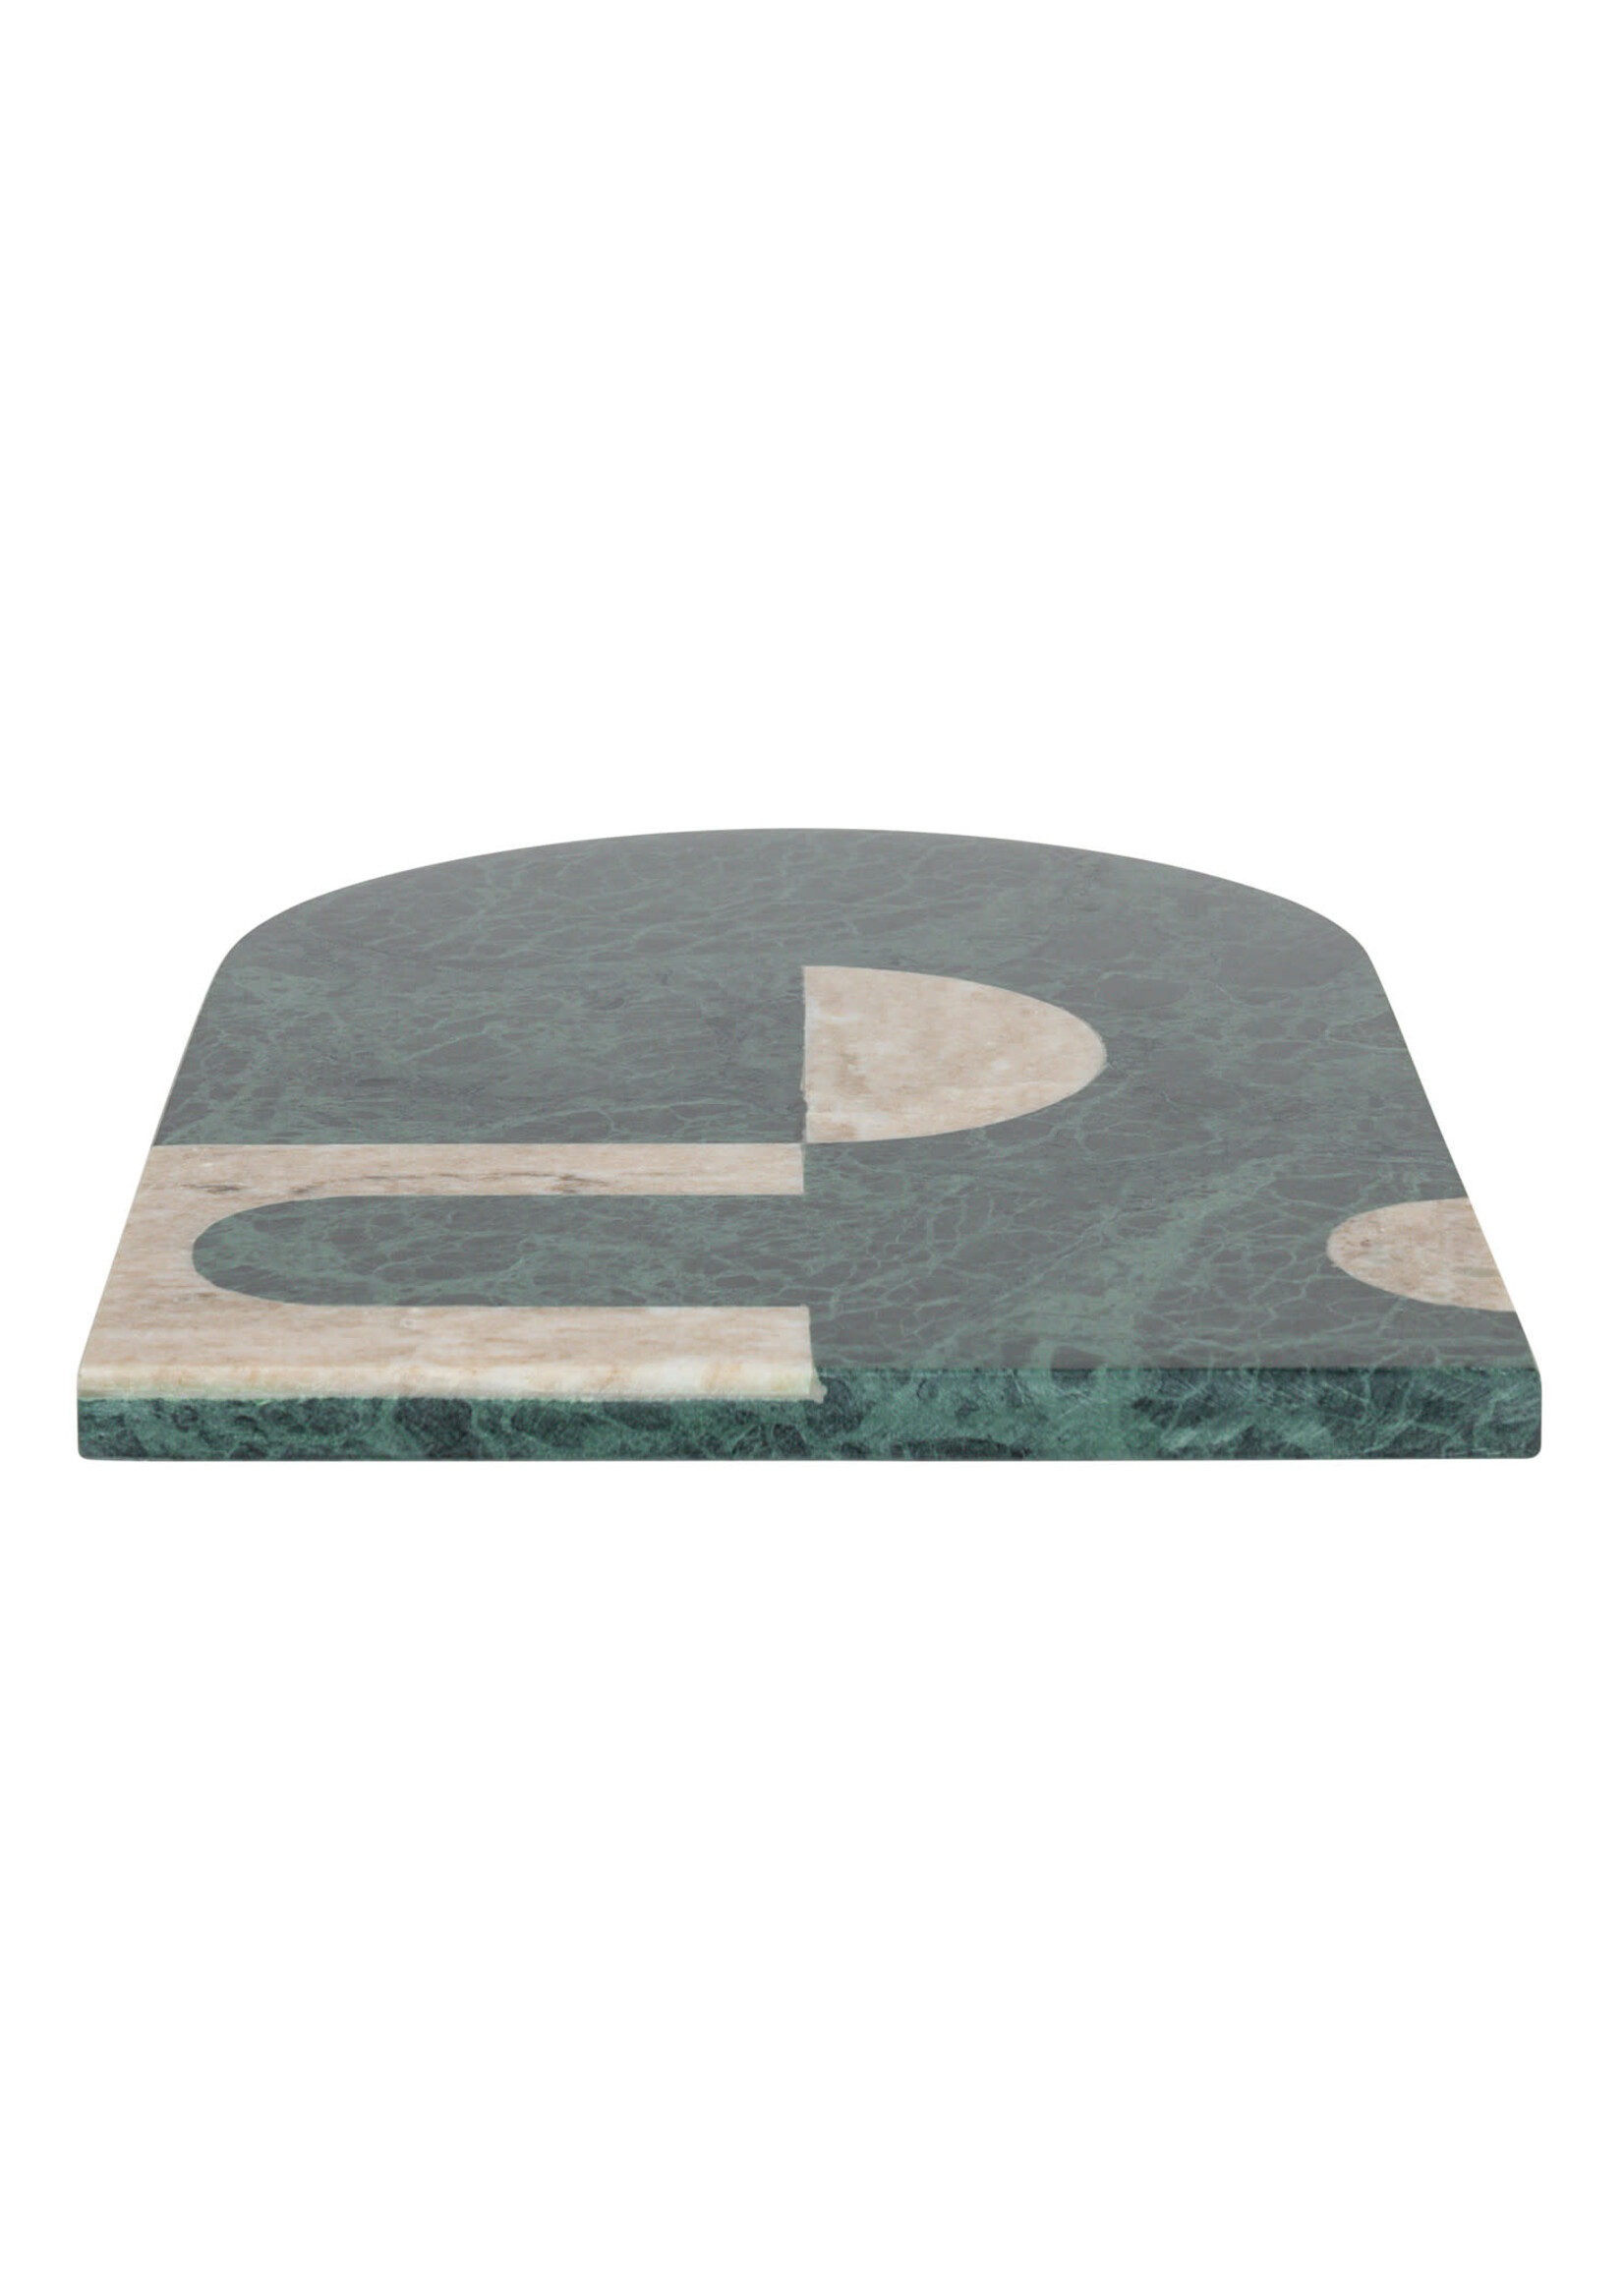 Marble Cheese/Cutting Board w/ Abstract Design, Buff Color & Green